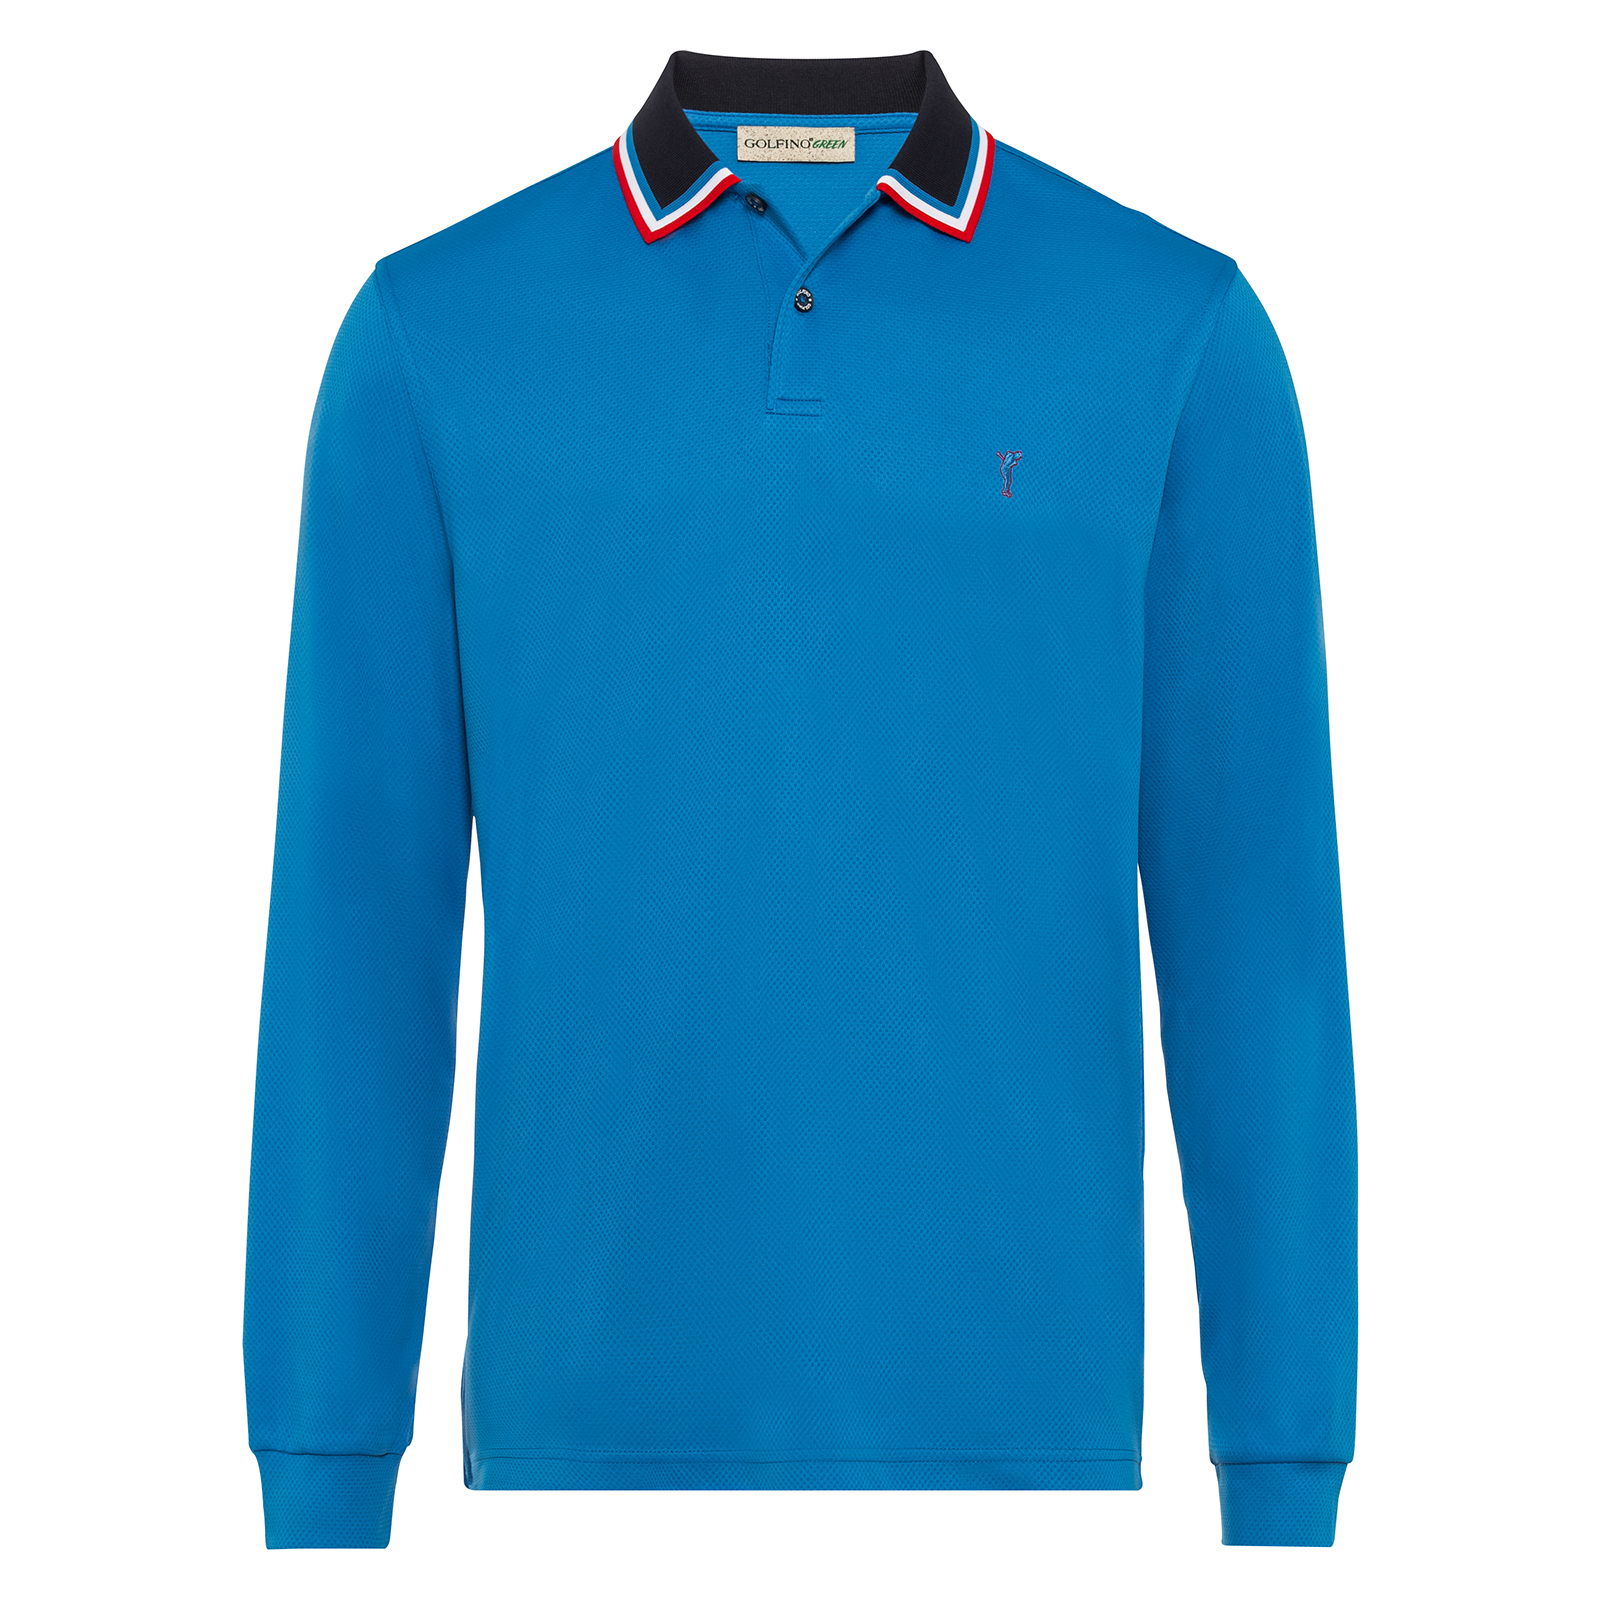 Sustainable men’s long-sleeved Kafetex® golf polo shirt 